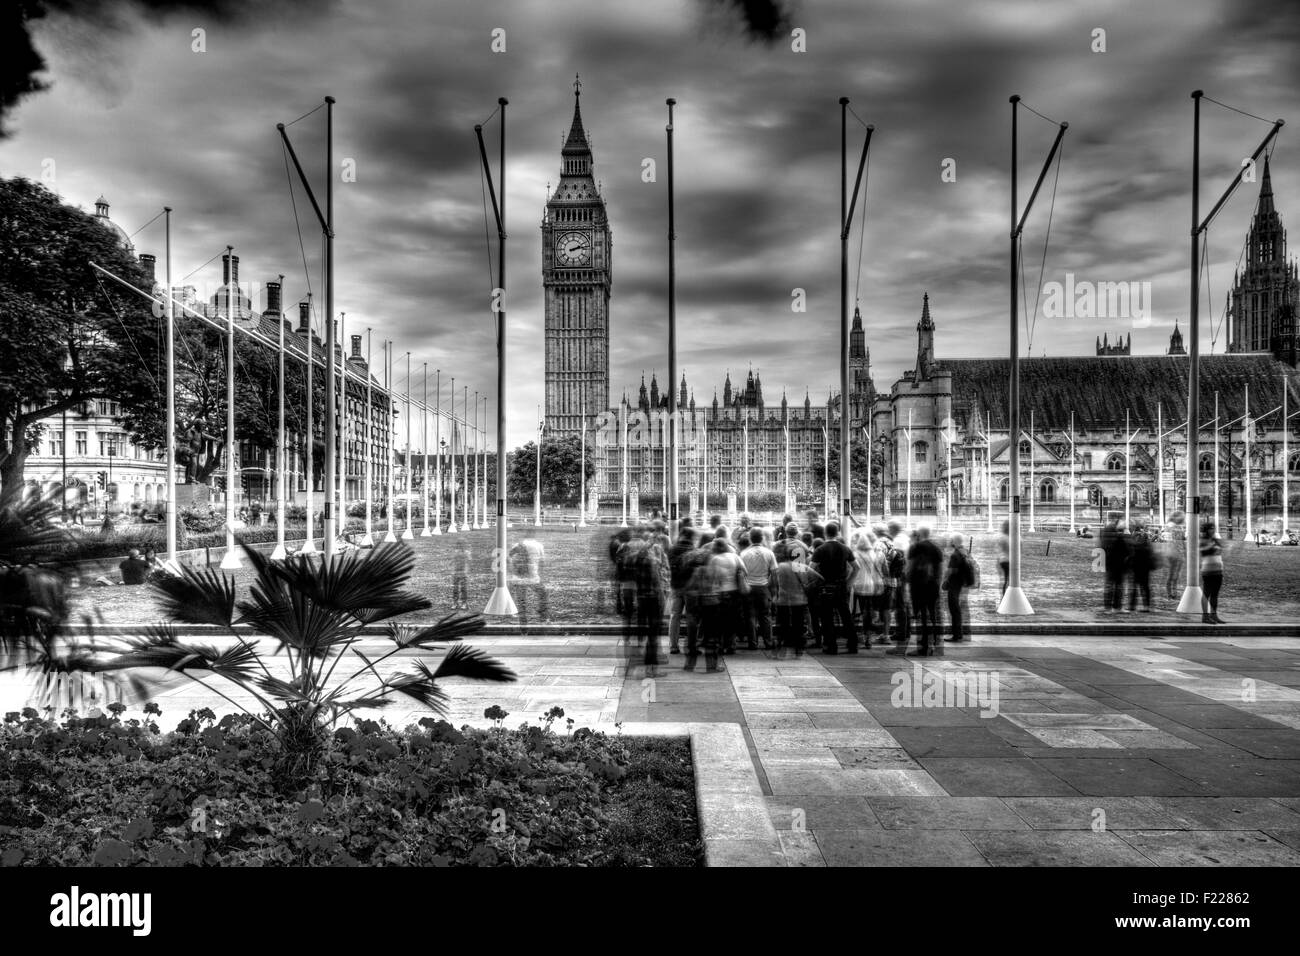 Parliament Square and The Houses Of Parliament, London, England Stock Photo